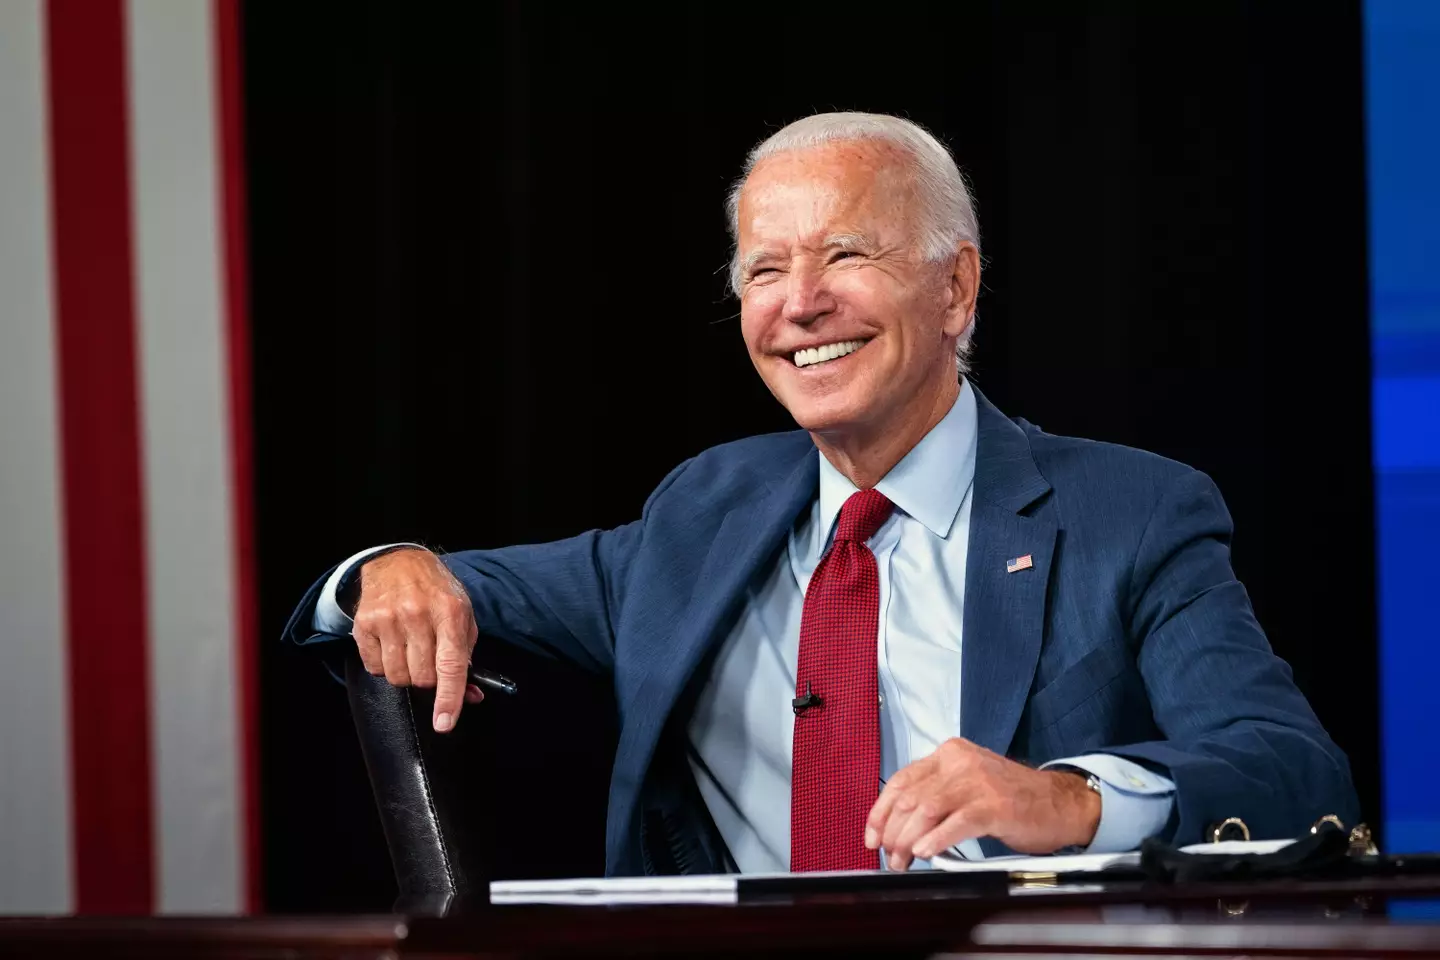 Joe Biden is the first serving president to reach his 80s.